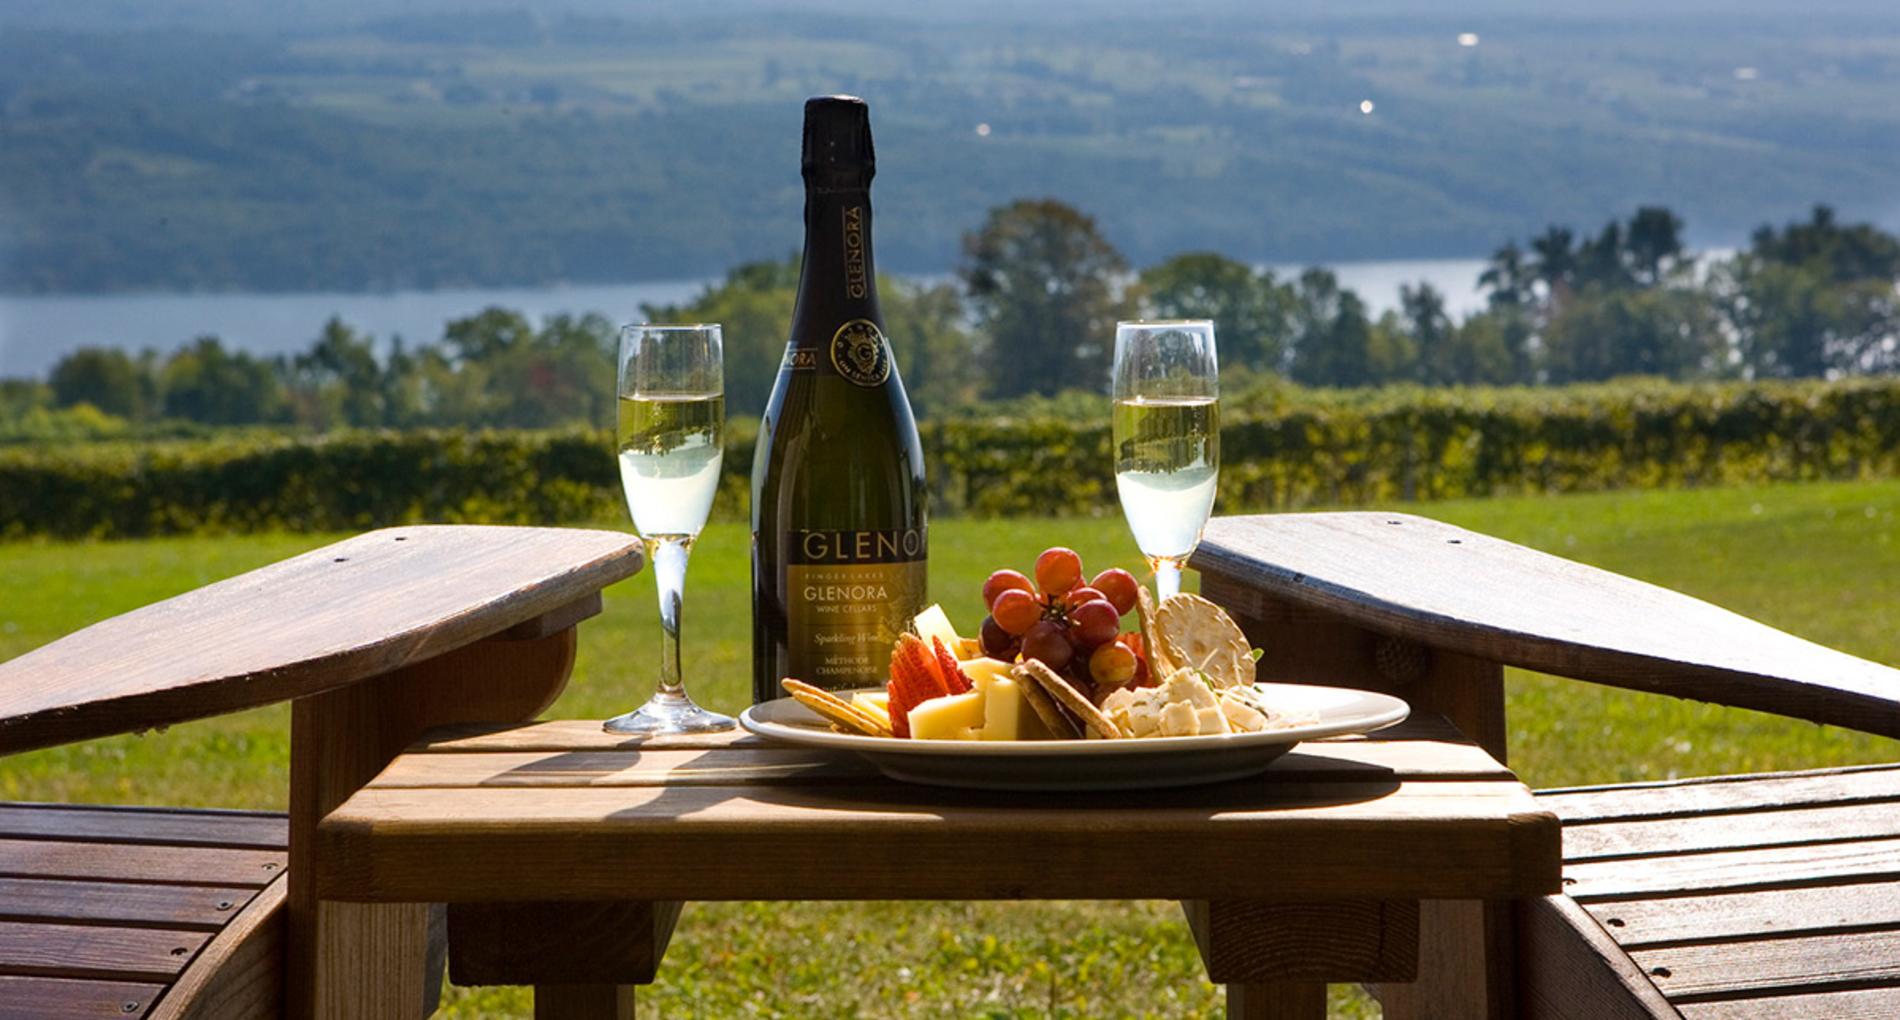 Official Travel and Tourism Information for Finger Lakes Wine Country